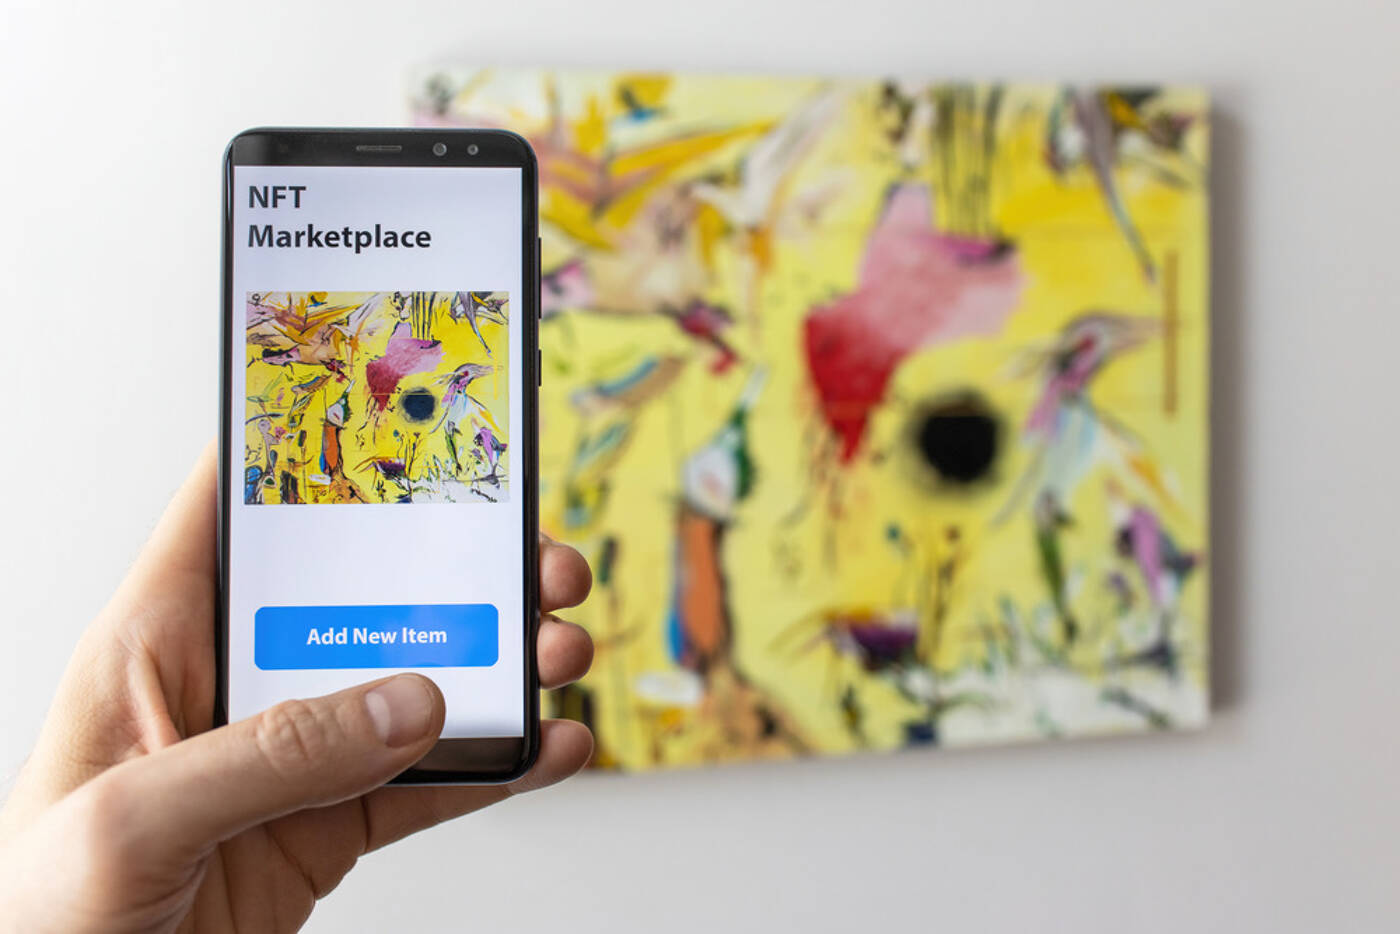 New NFT Marketplace LooksRare Launches, Suffers DDoS Attack